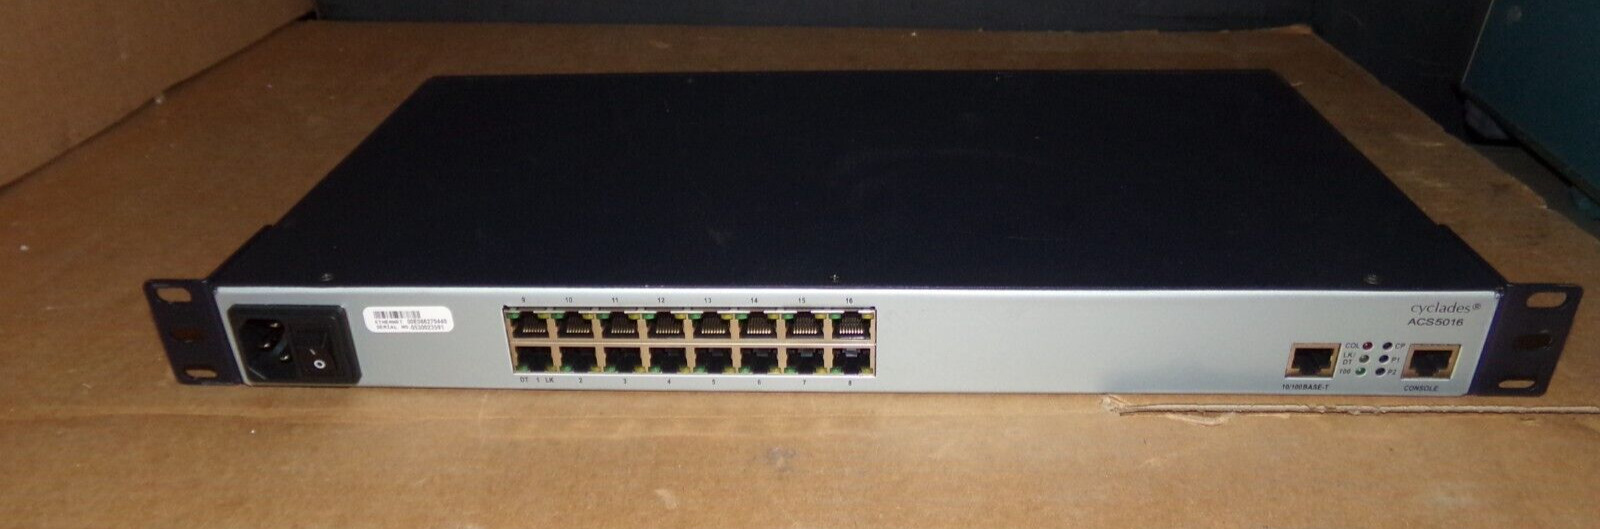 Avocent ACS5016 16 Port Cyclades Console Server 520-559-501